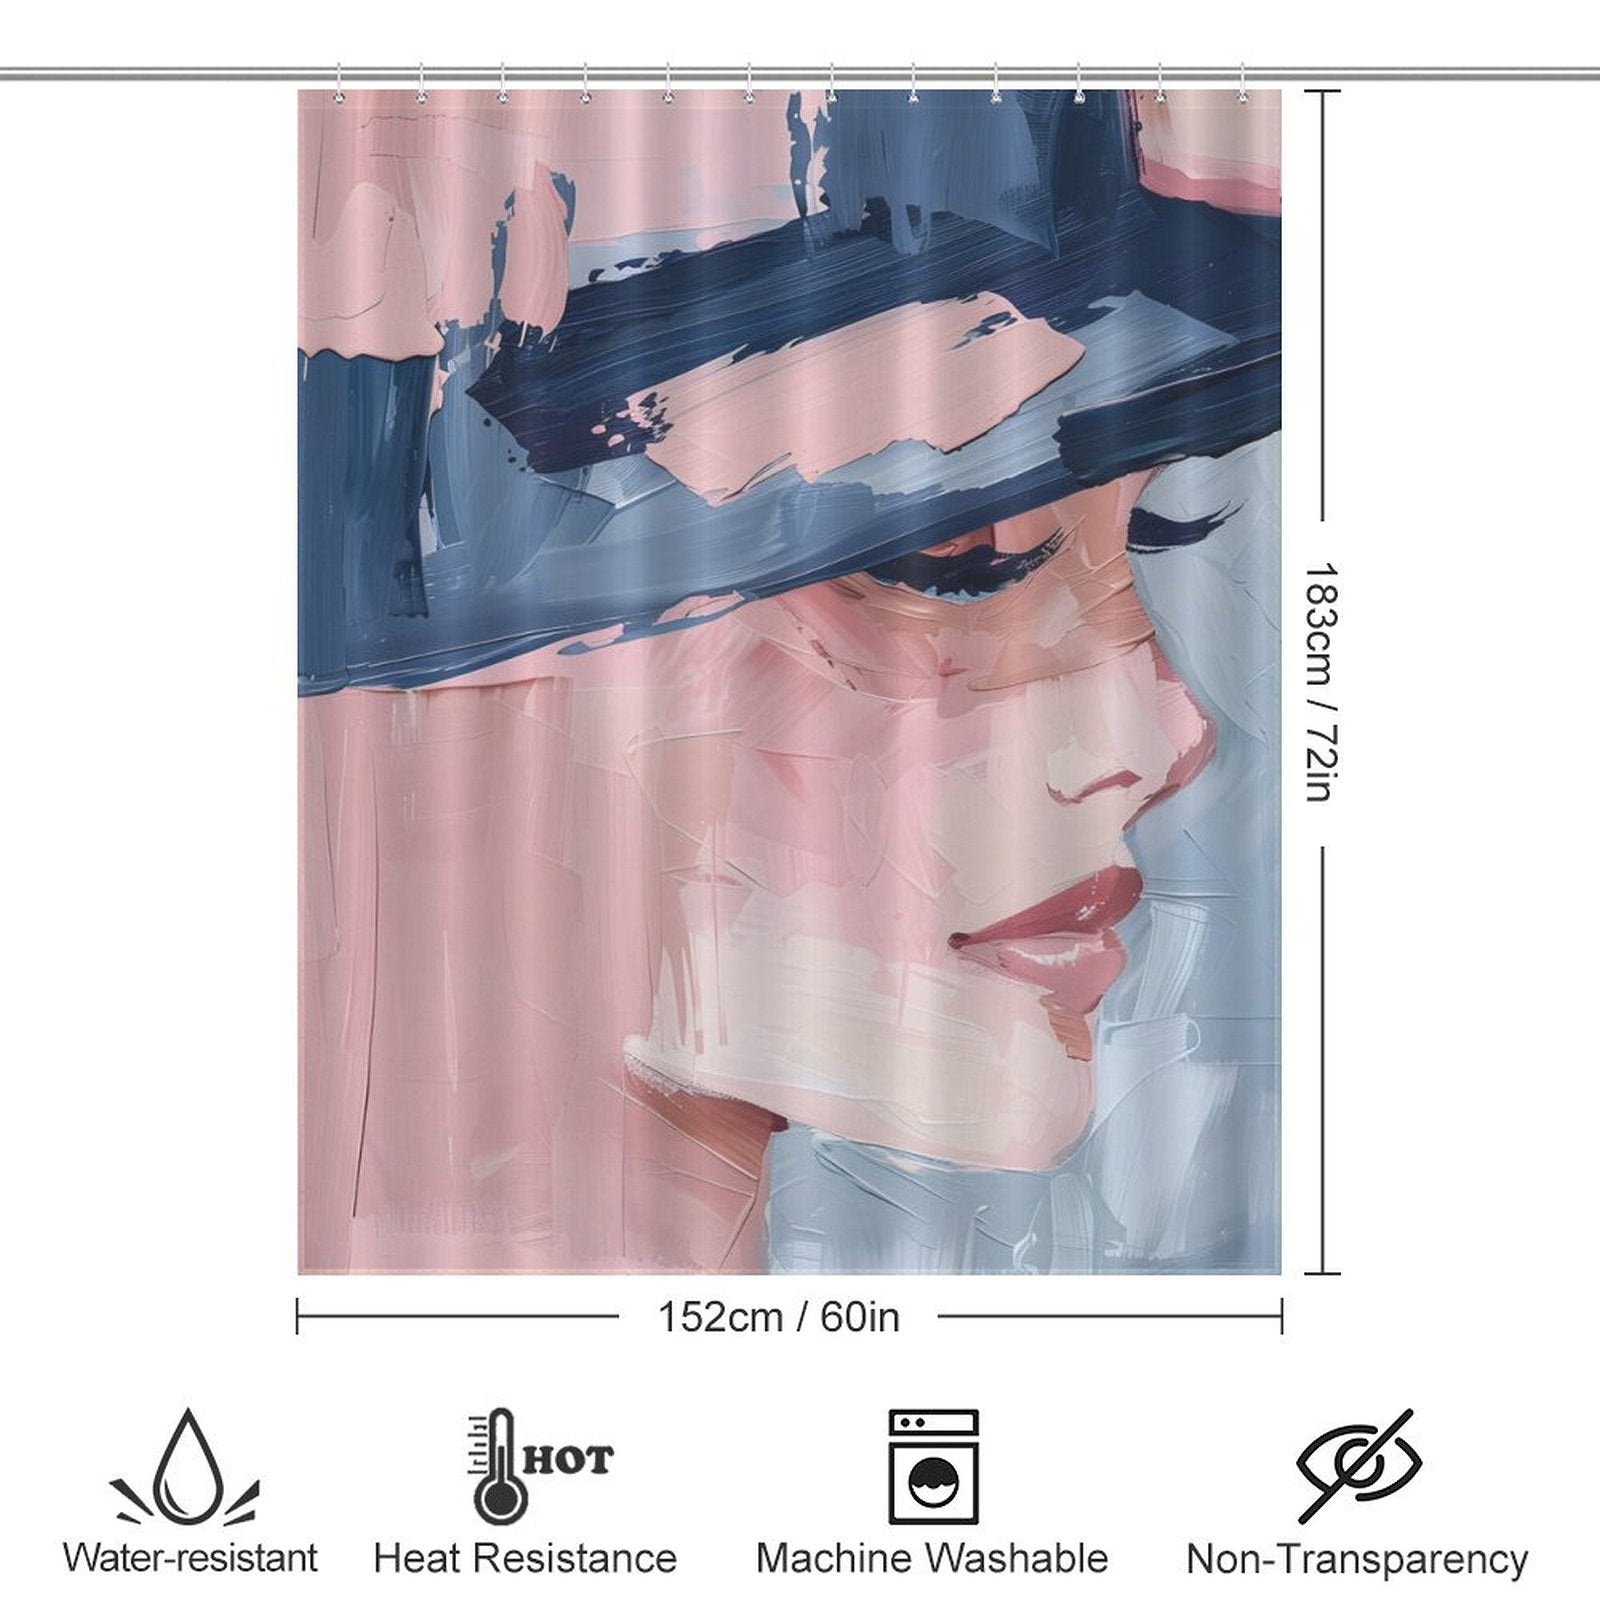 Mid Century Women Face Abstract Aesthetic Oil Painting Modern Art Blush Pink Navy Blue Cream Shower Curtain-Cottoncat by Cotton Cat featuring an abstract aesthetic oil painting of a woman's face wearing a hat in blush pink, navy blue, and cream. Curtain dimensions are 152 cm by 183 cm. Icons indicate it is water-resistant, heat-resistant, machine washable, and non-transparent.